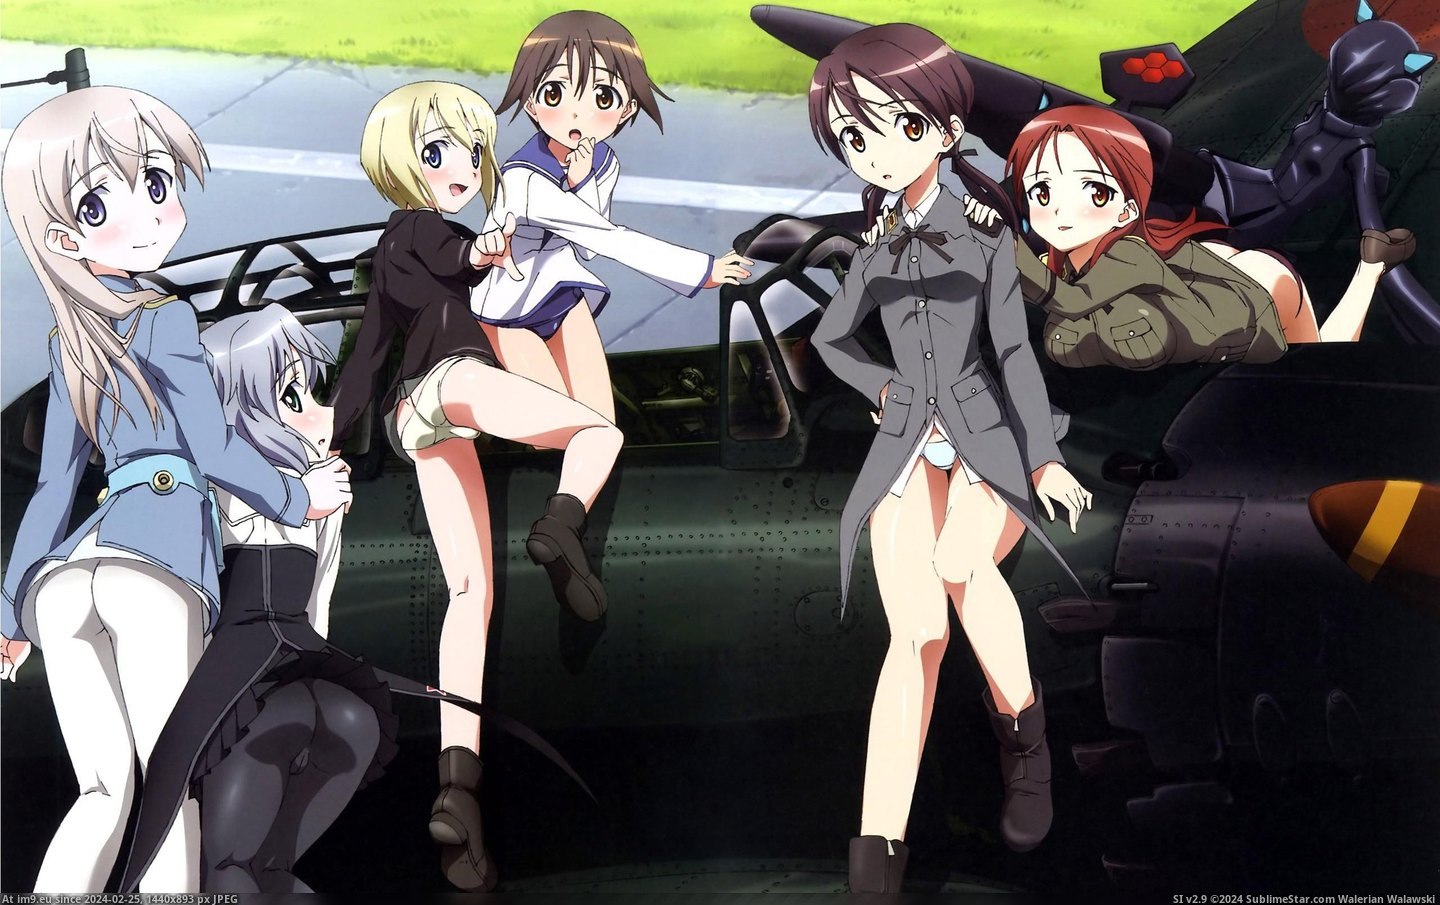 #Girls #Wallpaper #Witches #Anime #Strike Strike Witches Hd Anime Girls Wallpaper 61(1) (HD) Pic. (Bild von album HD Wallpapers - anime, games and abstract art/3D backgrounds))